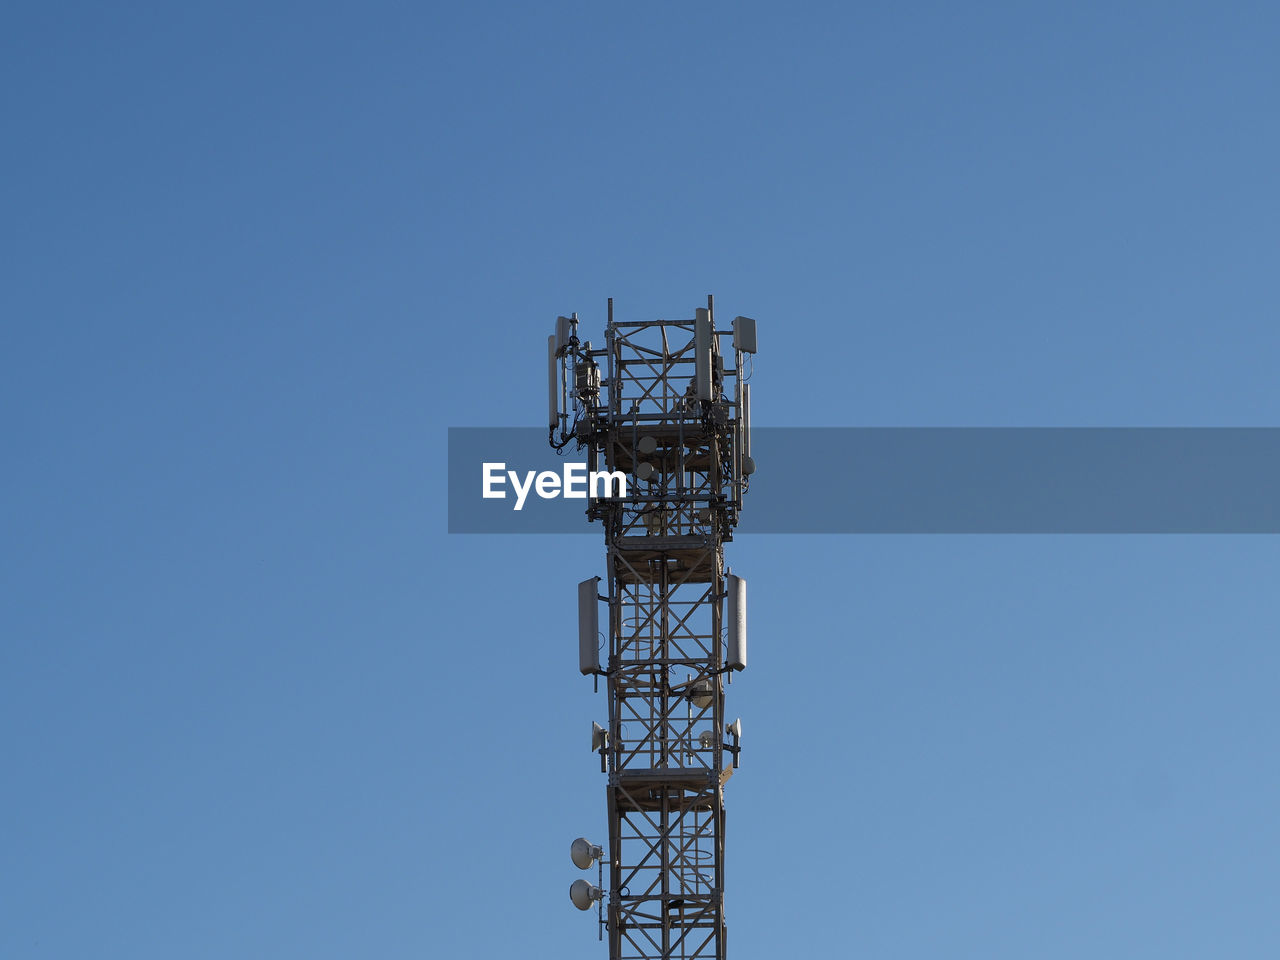 technology, sky, tower, communications tower, clear sky, blue, communication, built structure, broadcasting, antenna, wireless technology, global communications, architecture, no people, satellite dish, low angle view, copy space, satellite, electricity, metal, nature, telecommunications equipment, mast, telecommunications engineering, day, transmission tower, outdoors, overhead power line, sunny